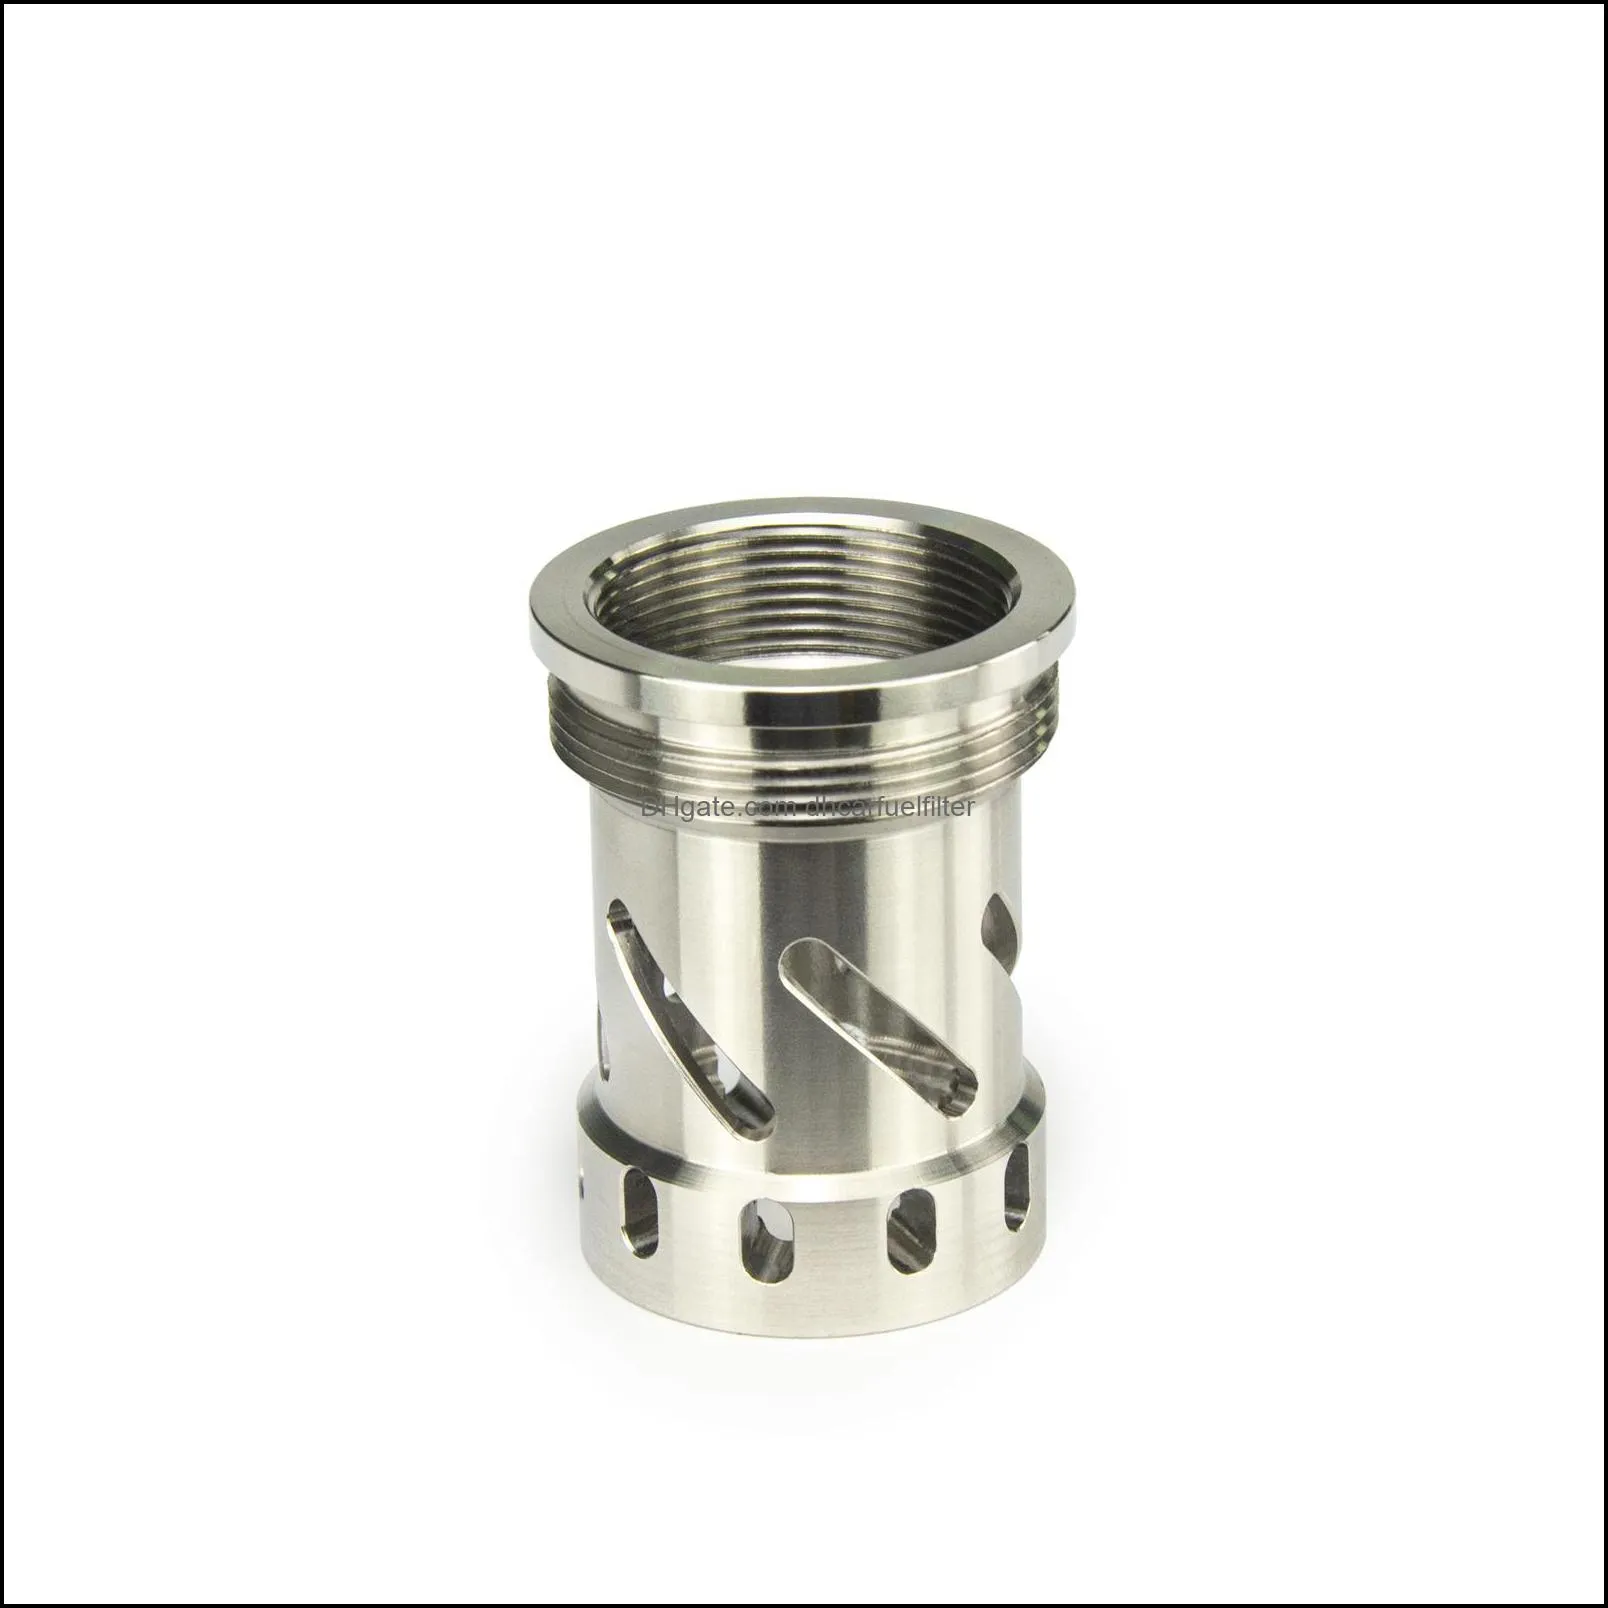 9inch l napa 4003 fuel filter stainless steel d cell k cup 1 2by28 5 8by24 aluminum solvent trap 1 375x24 aluminum tube